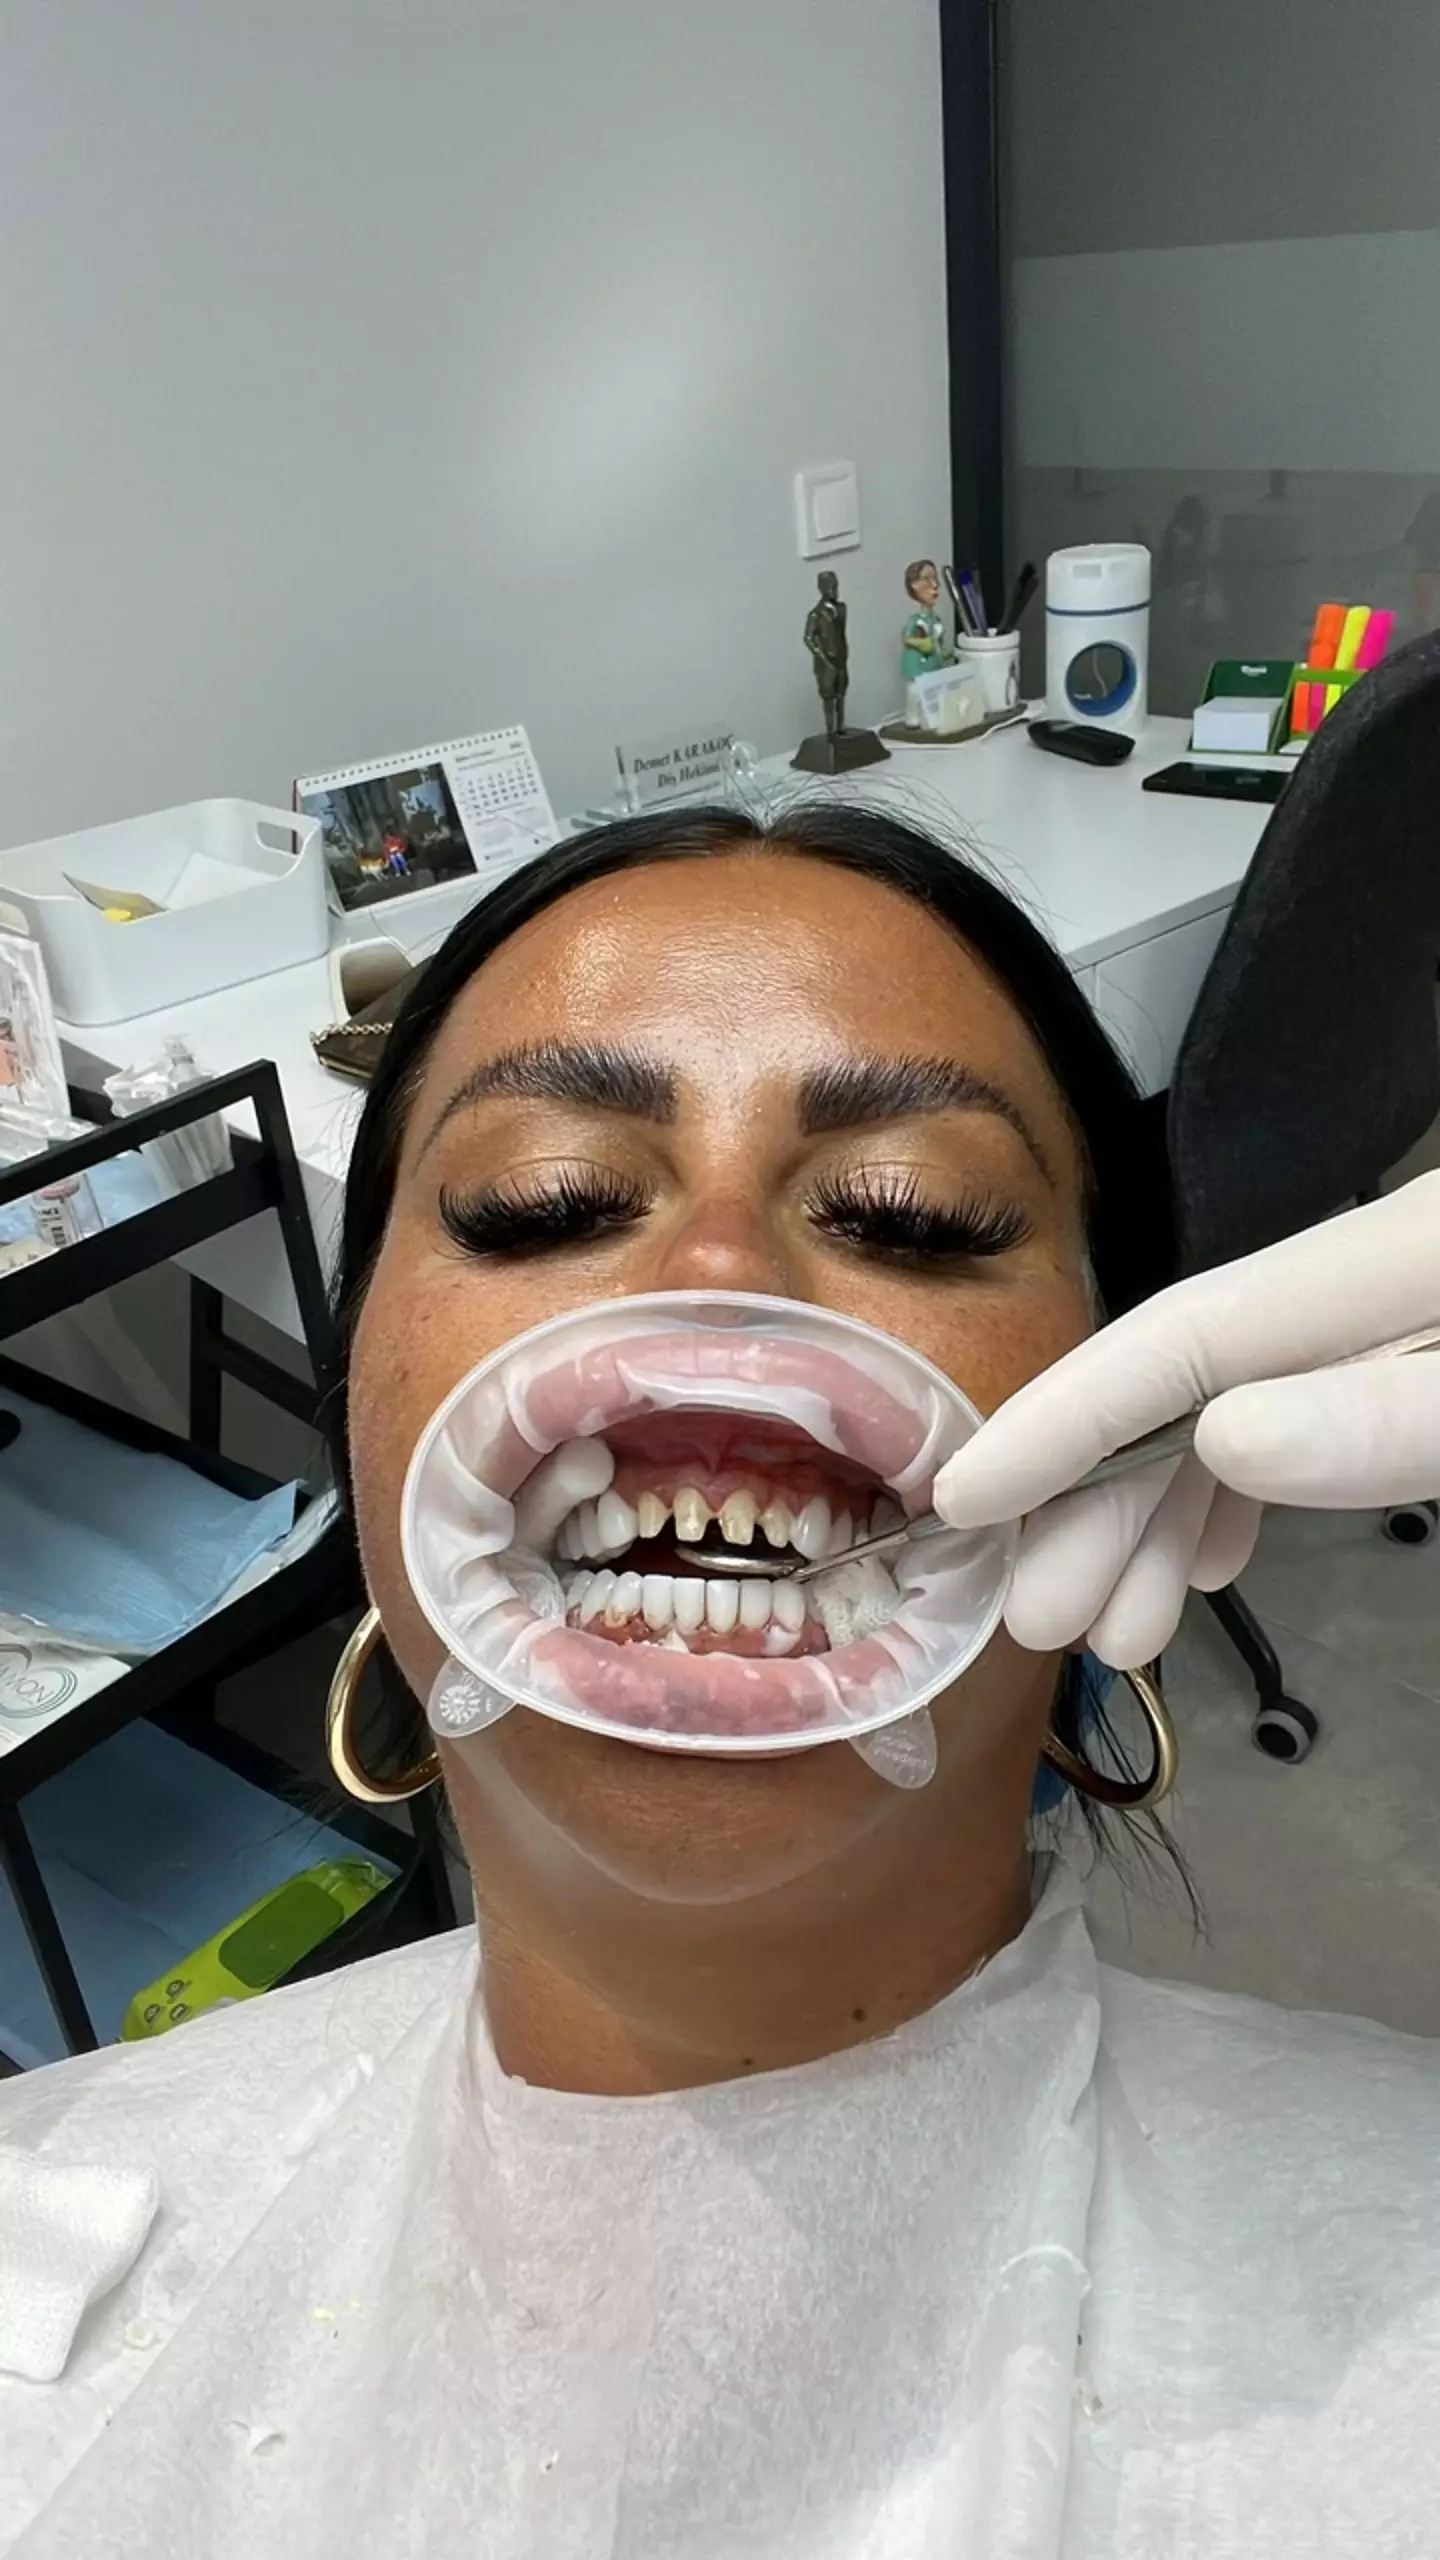 The couple opted to visit a private clinic for a cosmetic veneer procedure, which involves shaving down their teeth before fitting the new set of veneers over the top of them.